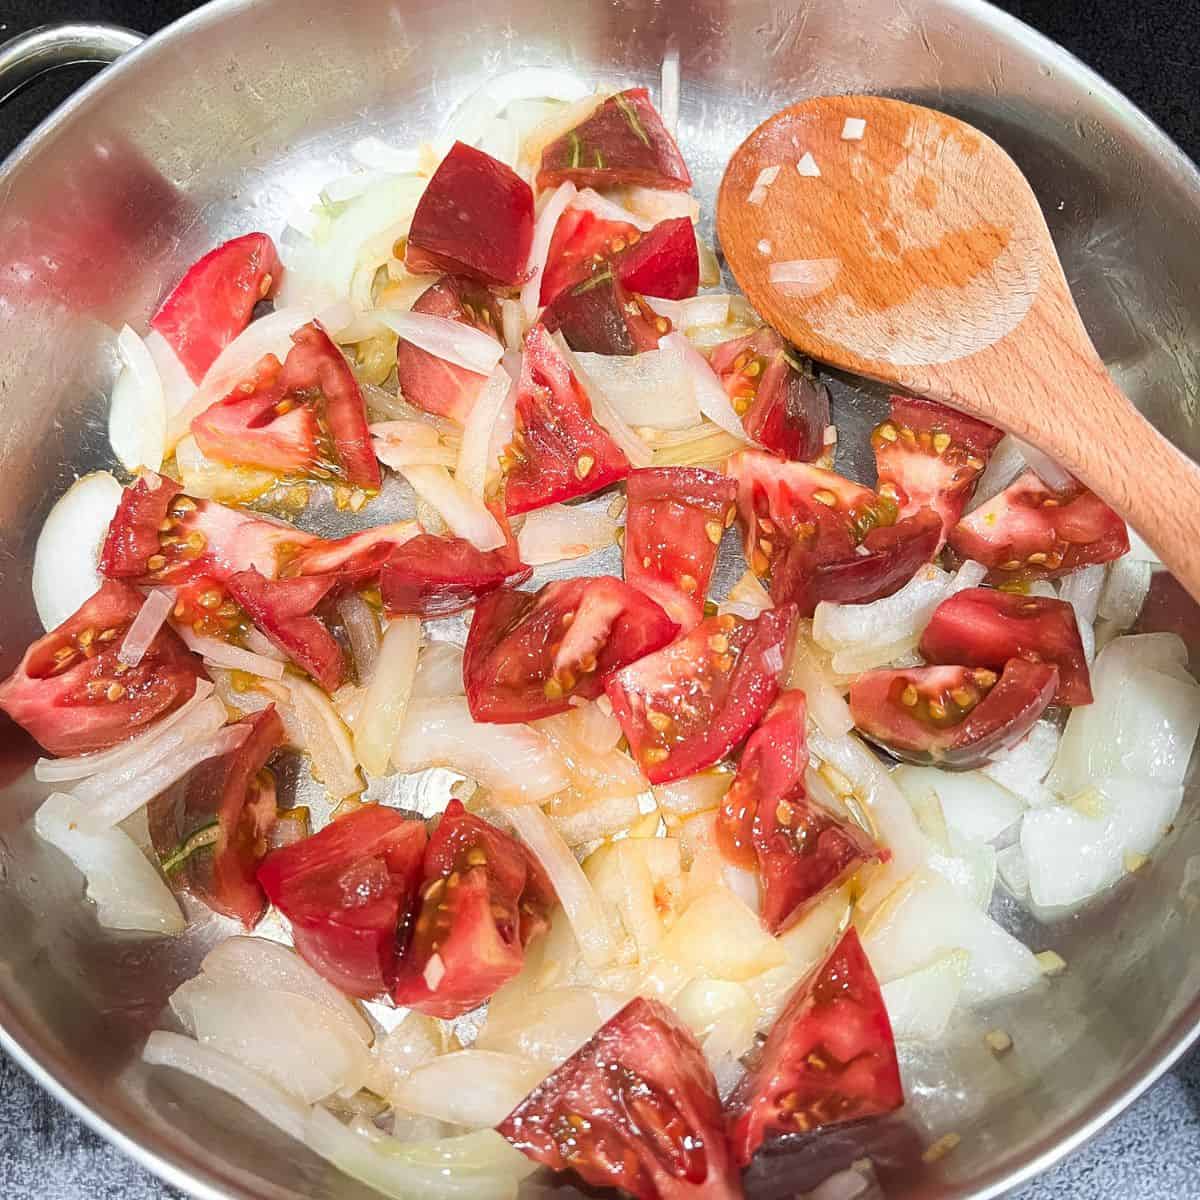 Saute onion, garlic, and tomatoes in skillet.